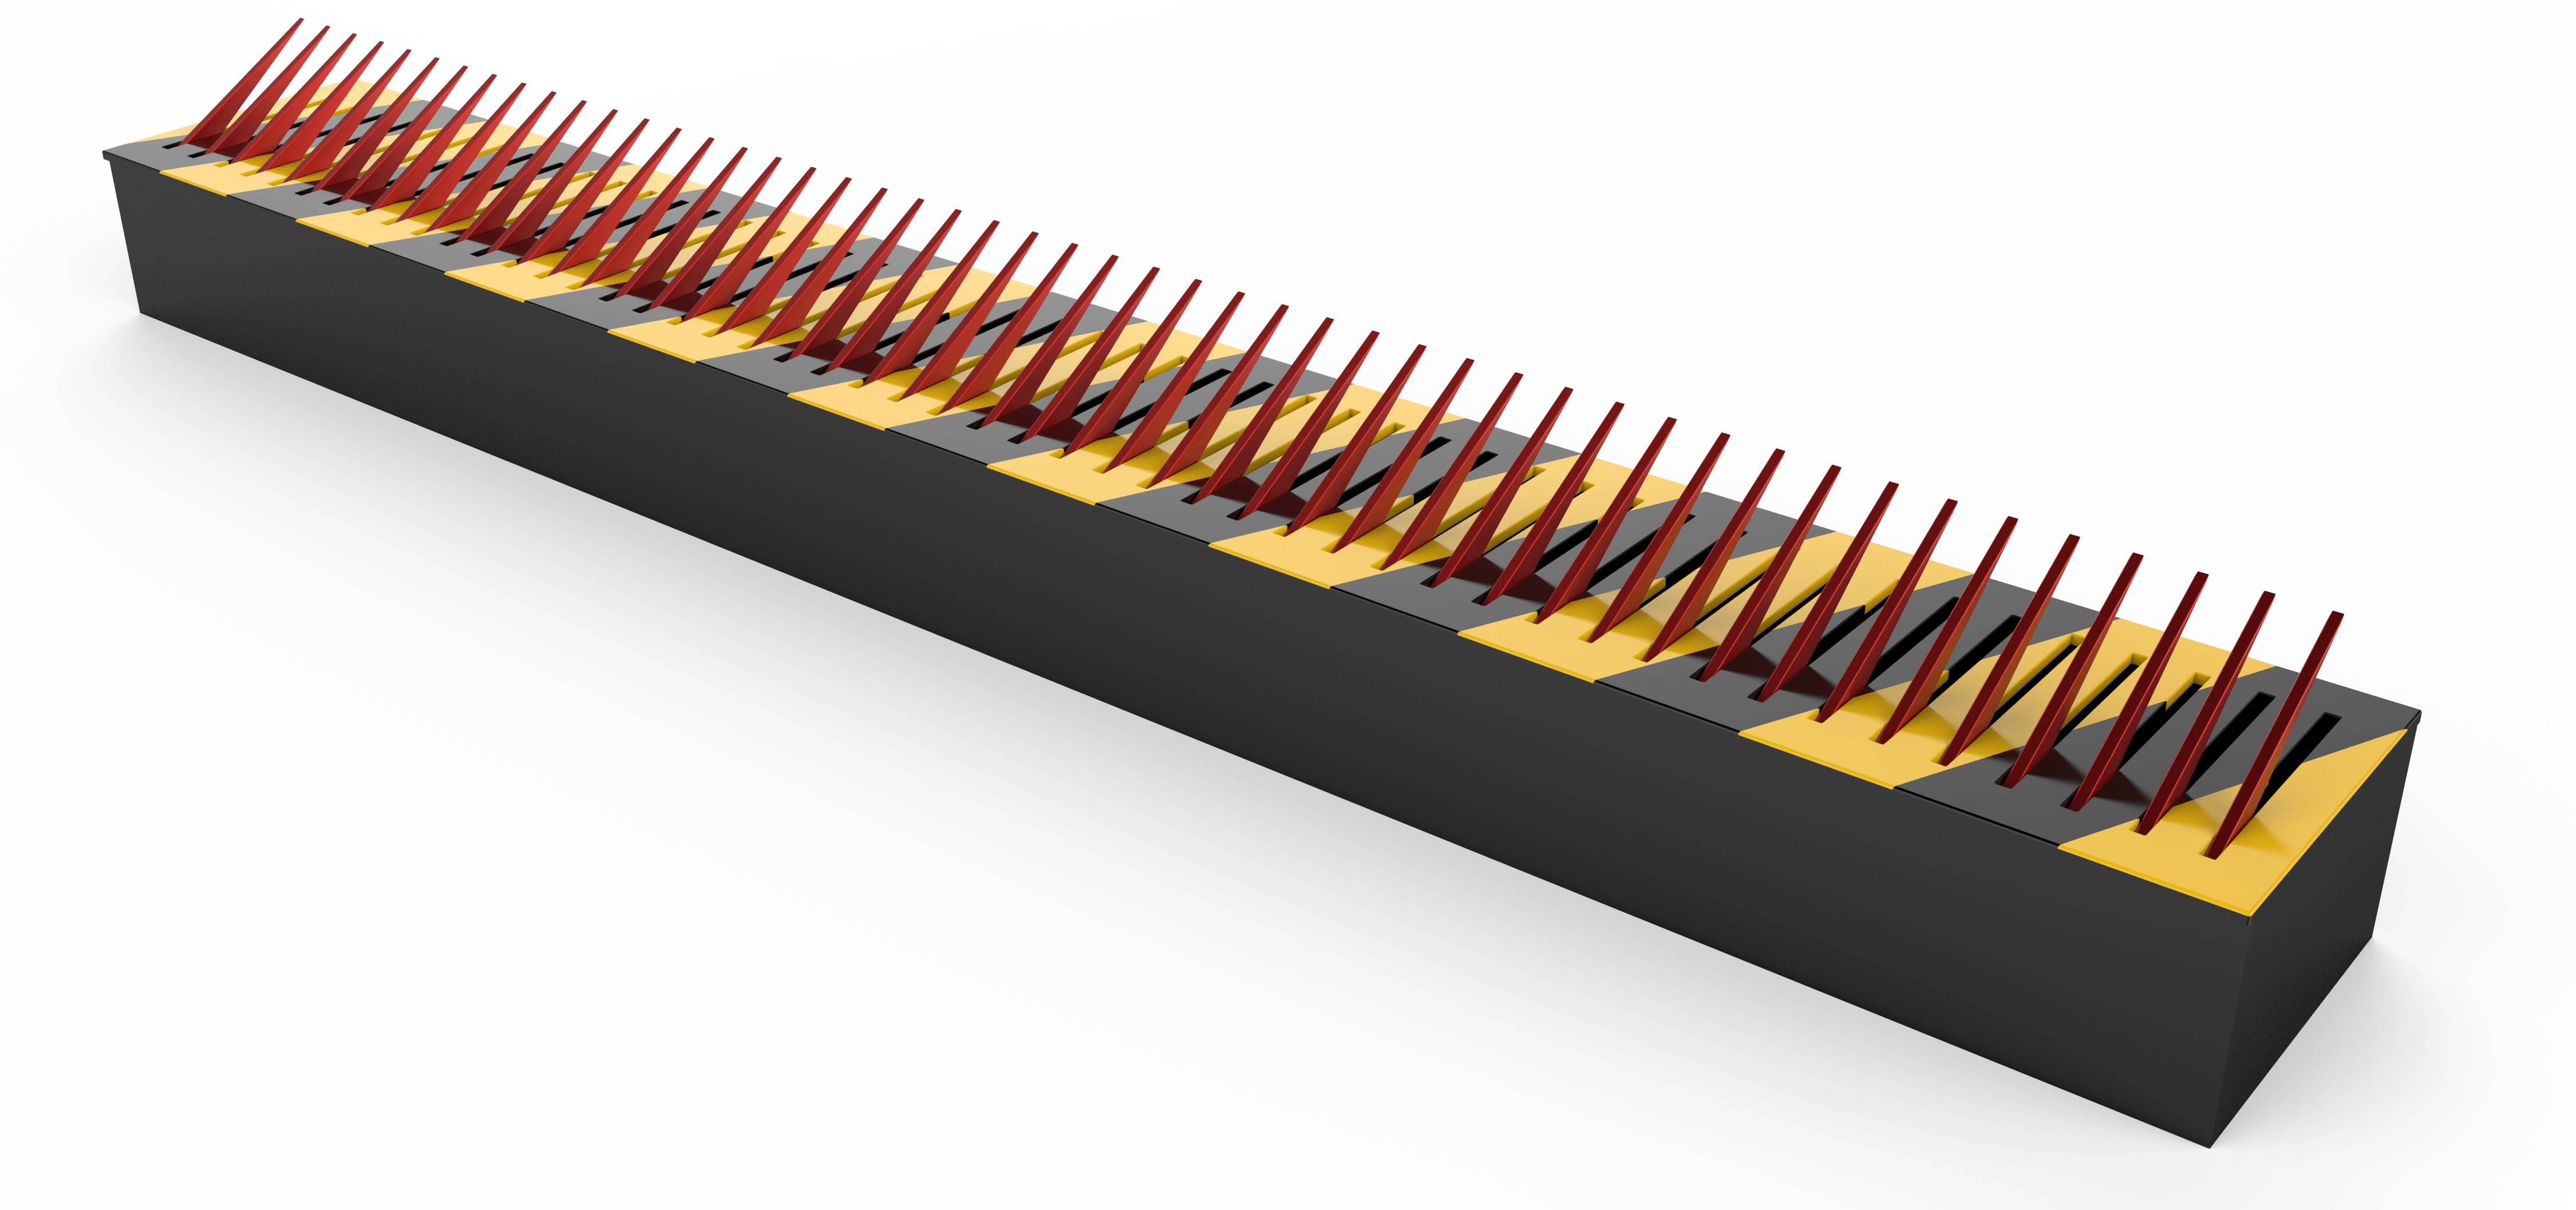 Automatic Spike Barrier